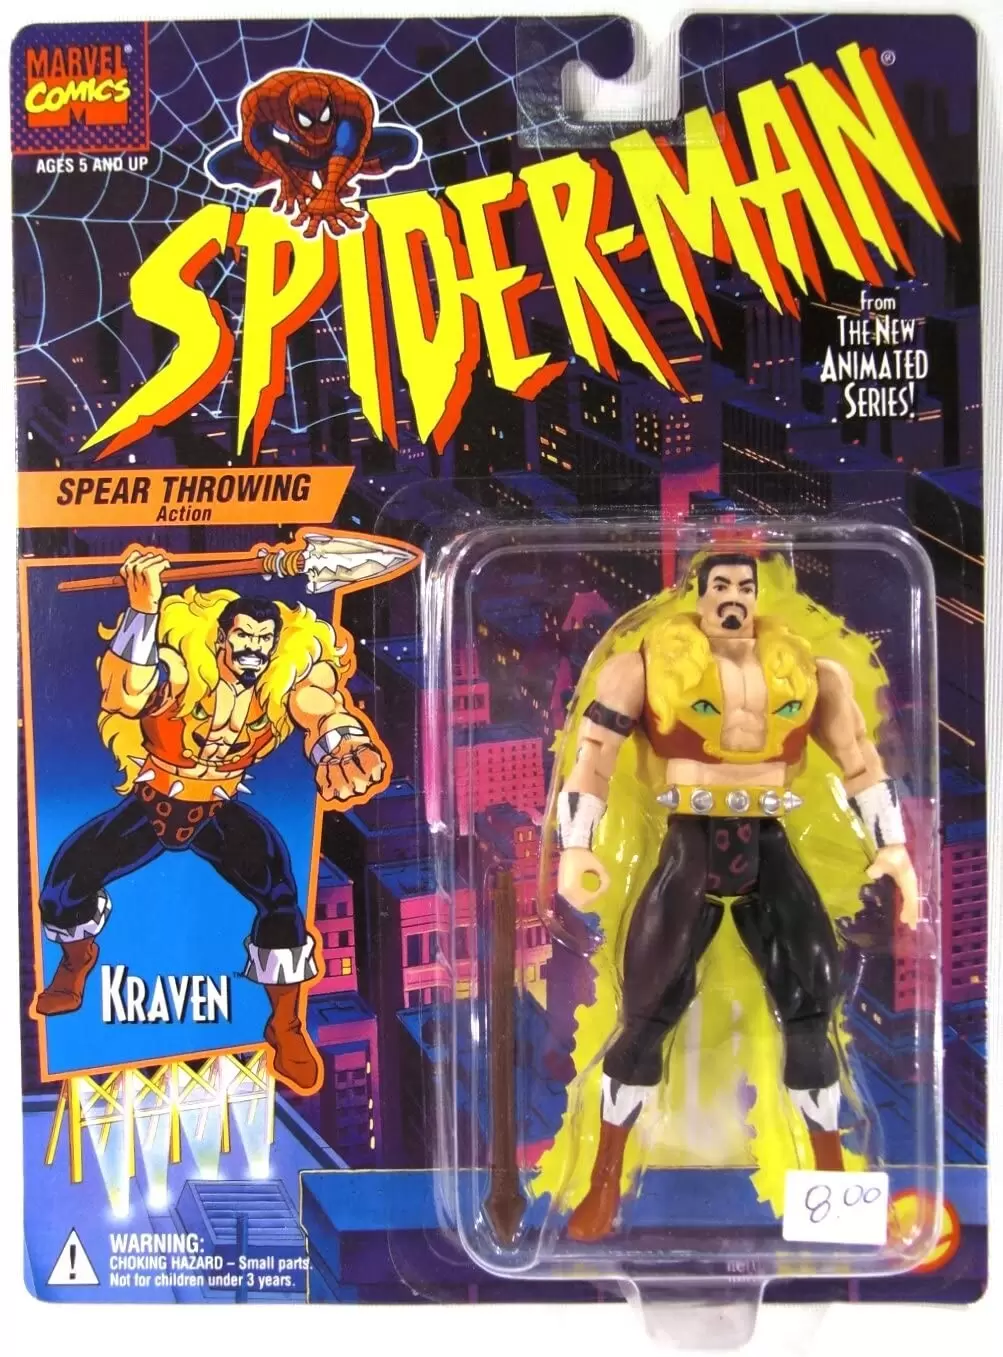 Spider-Man From The New Animated Series - Kraven